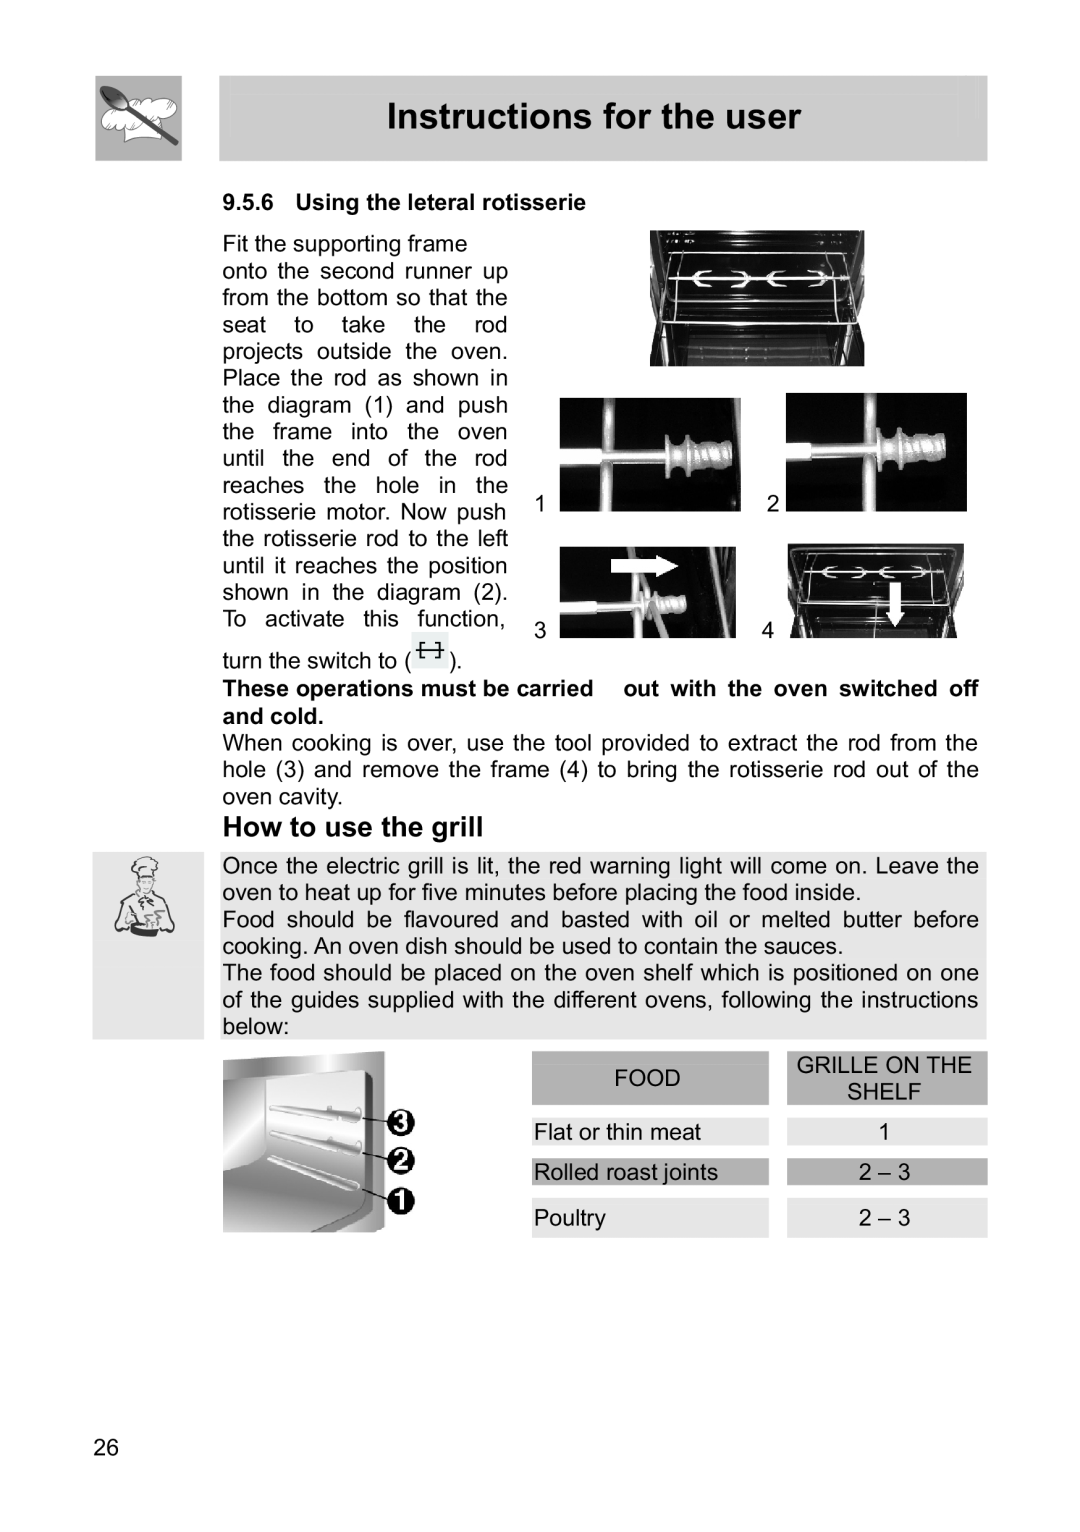 Smeg FS61MFXLP, FS60WHNG, FS60XNG How to use the grill, Instructions for the user, Using the leteral rotisserie, and cold 